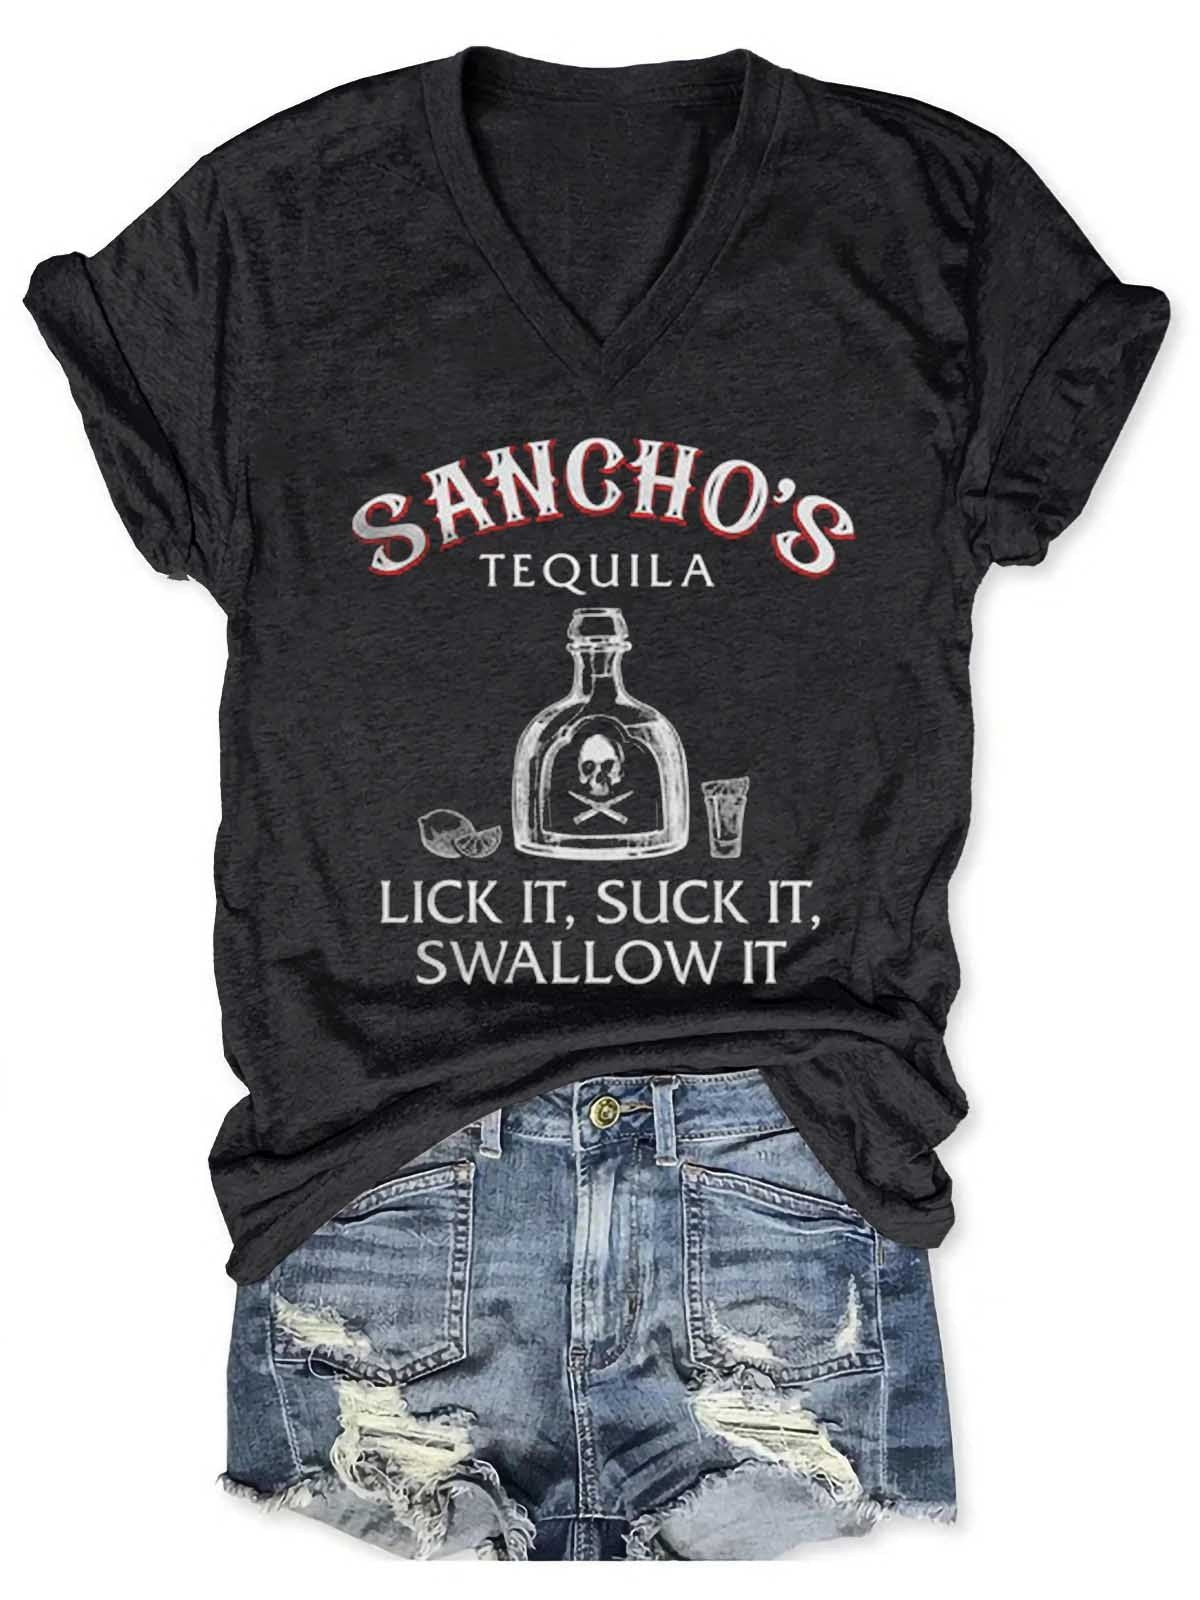 Women's Sancho's Tequila Lick It Suck It Swallow It V-Neck T-Shirt - Outlets Forever